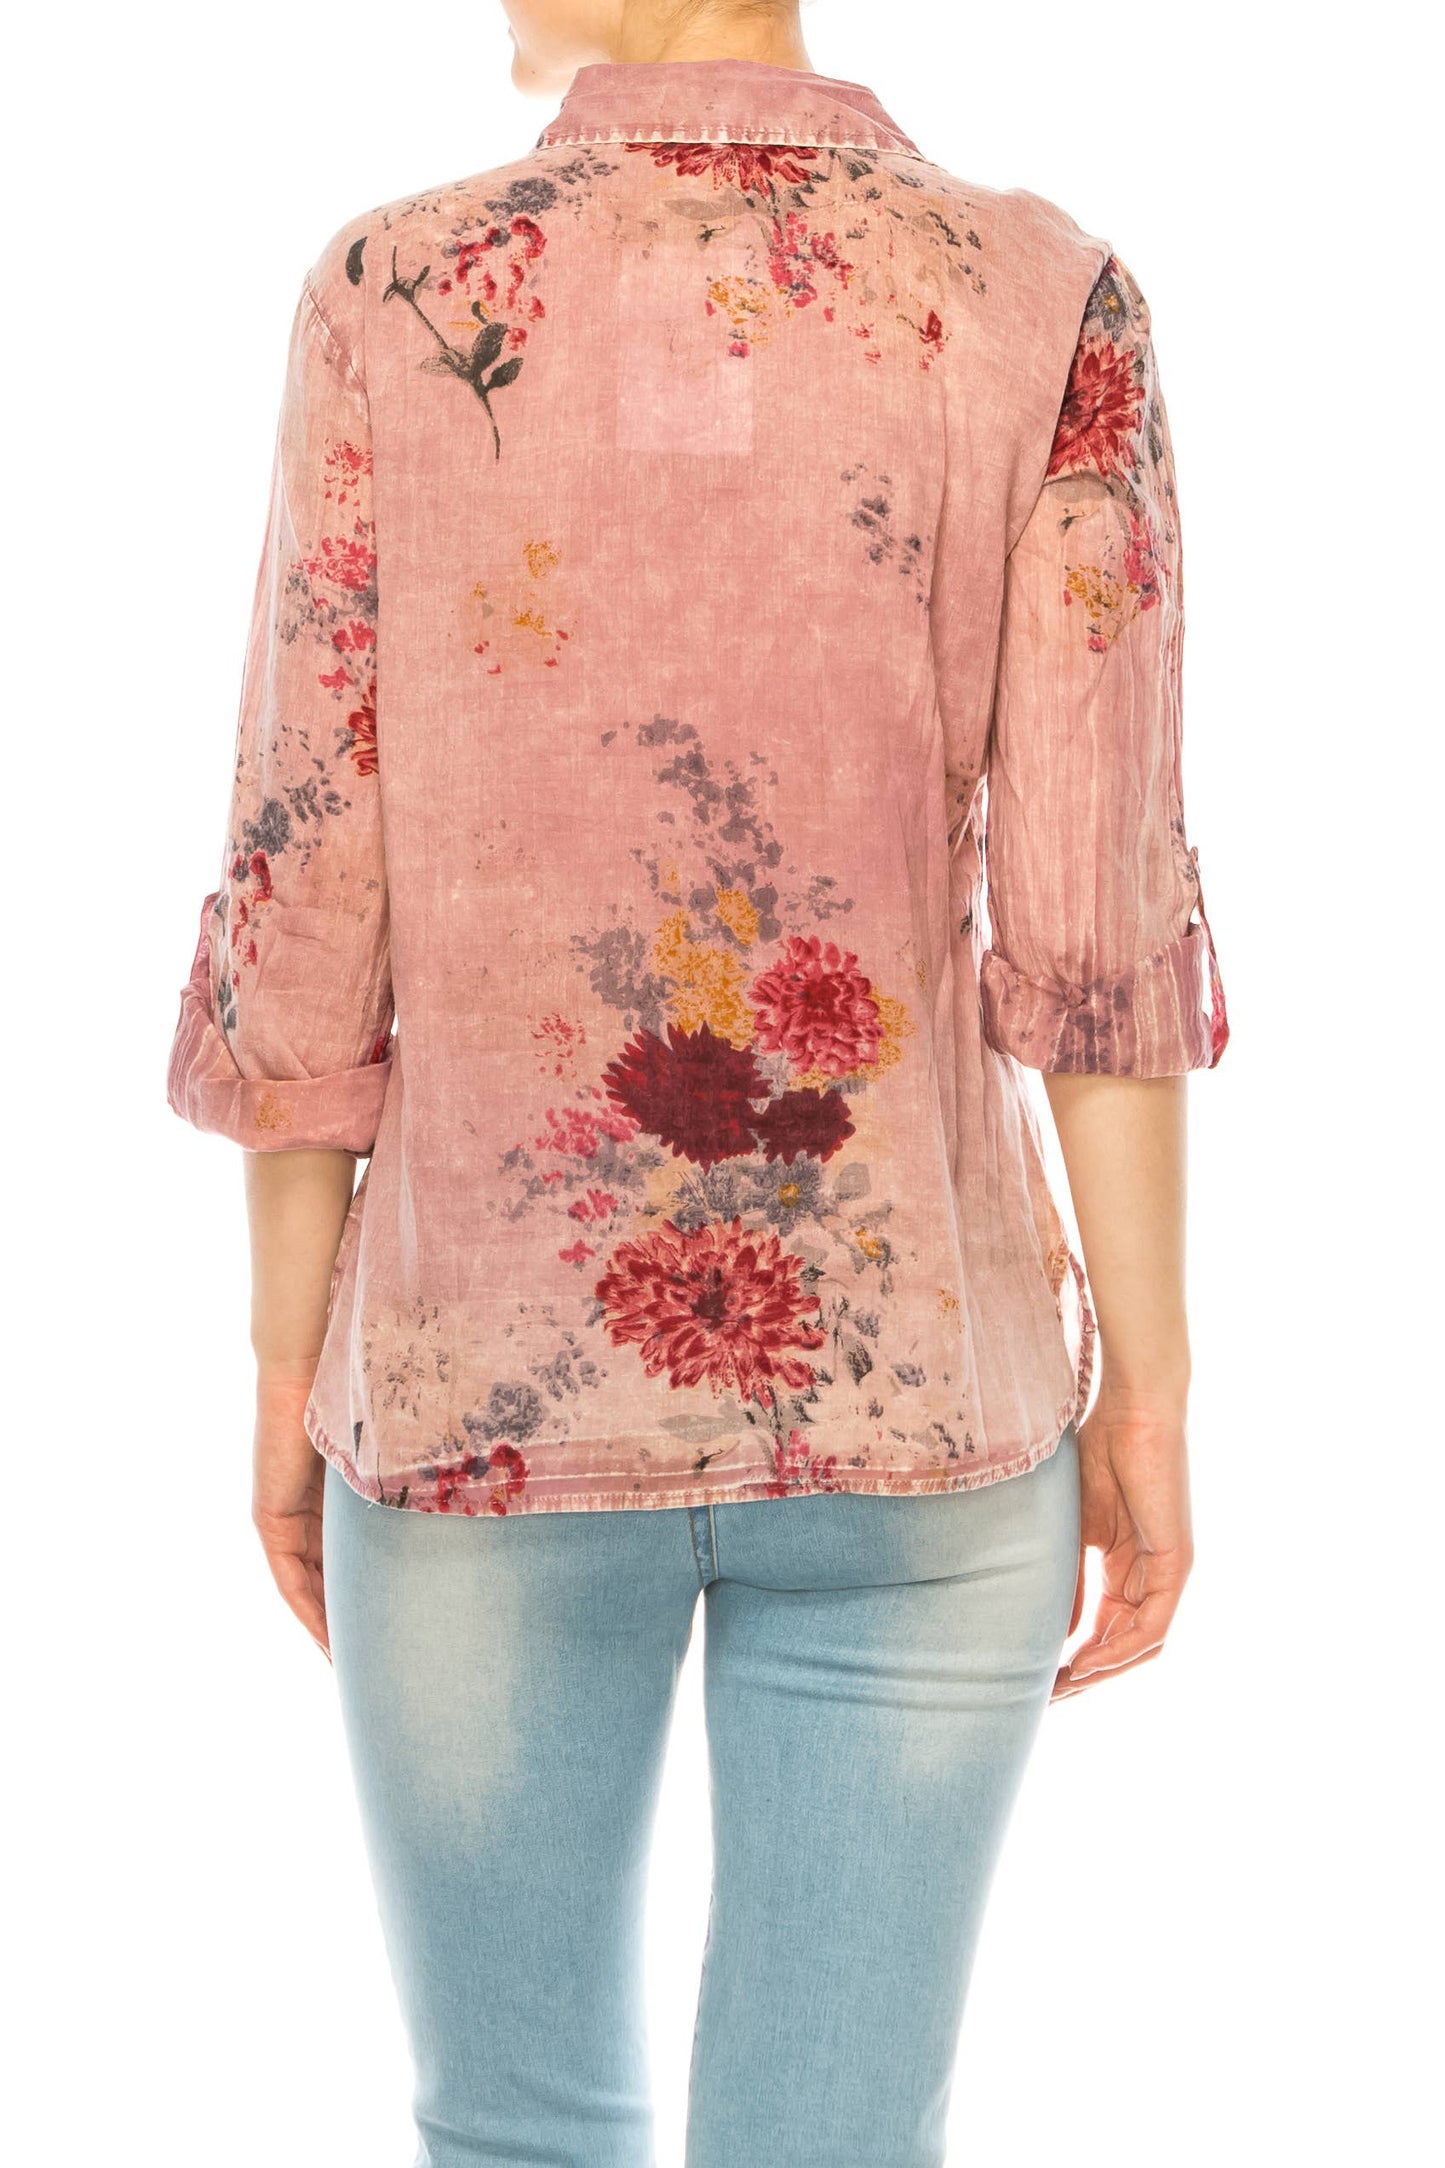 Magazine Clothing - Vintage Pink Floral Printed Shirt with Embroidery: Medium